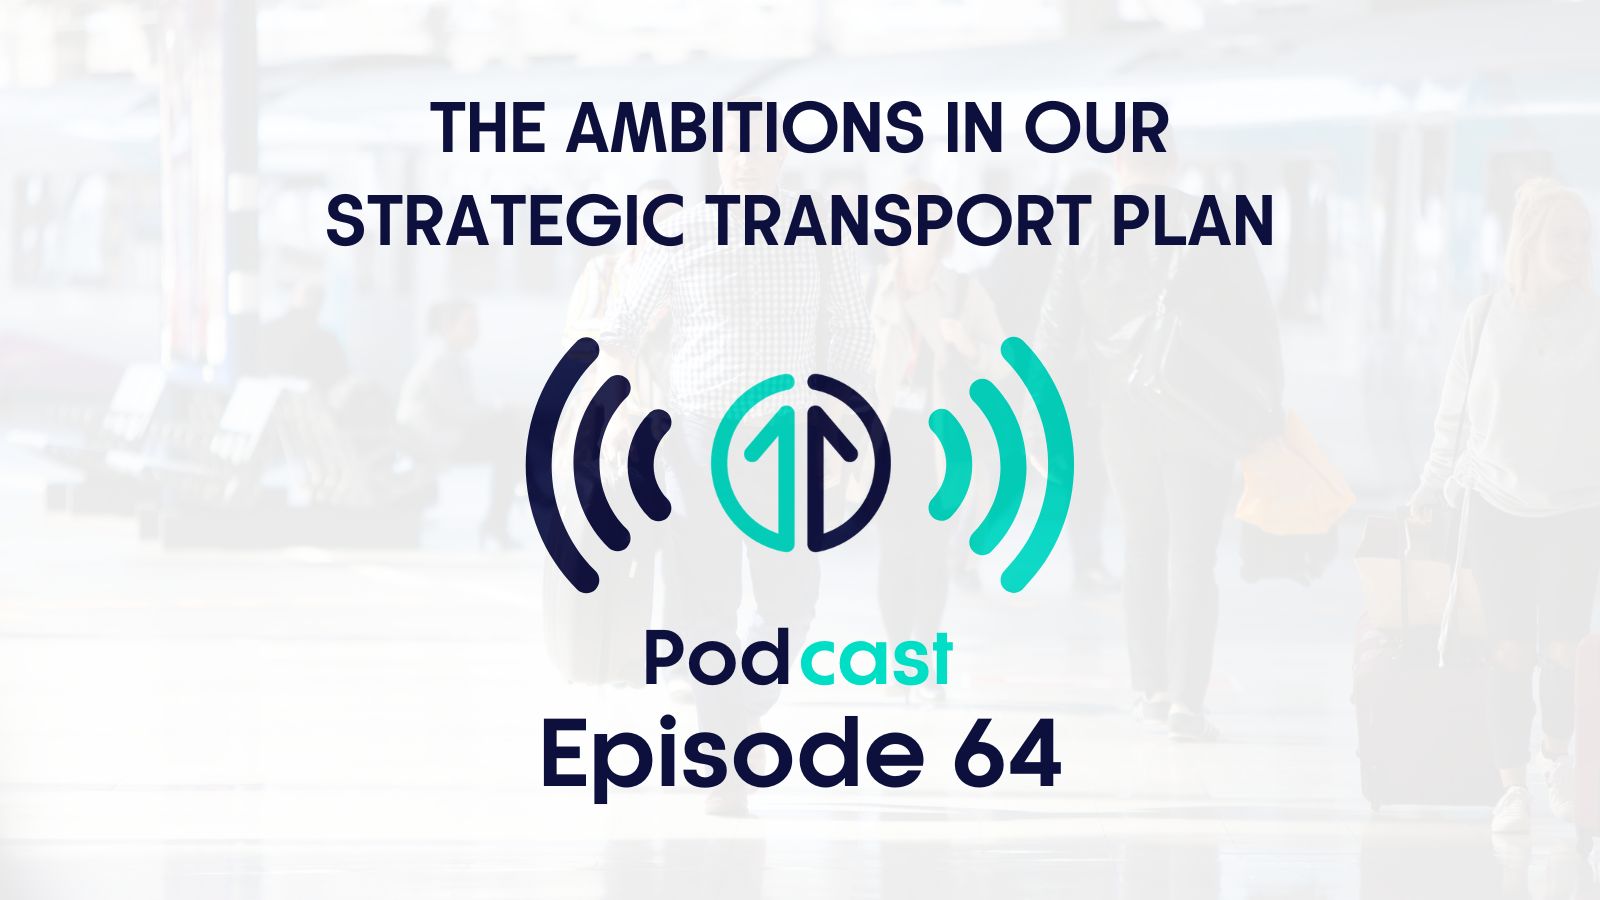 The ambitions in our Strategic Transport Plan podcast episode 64